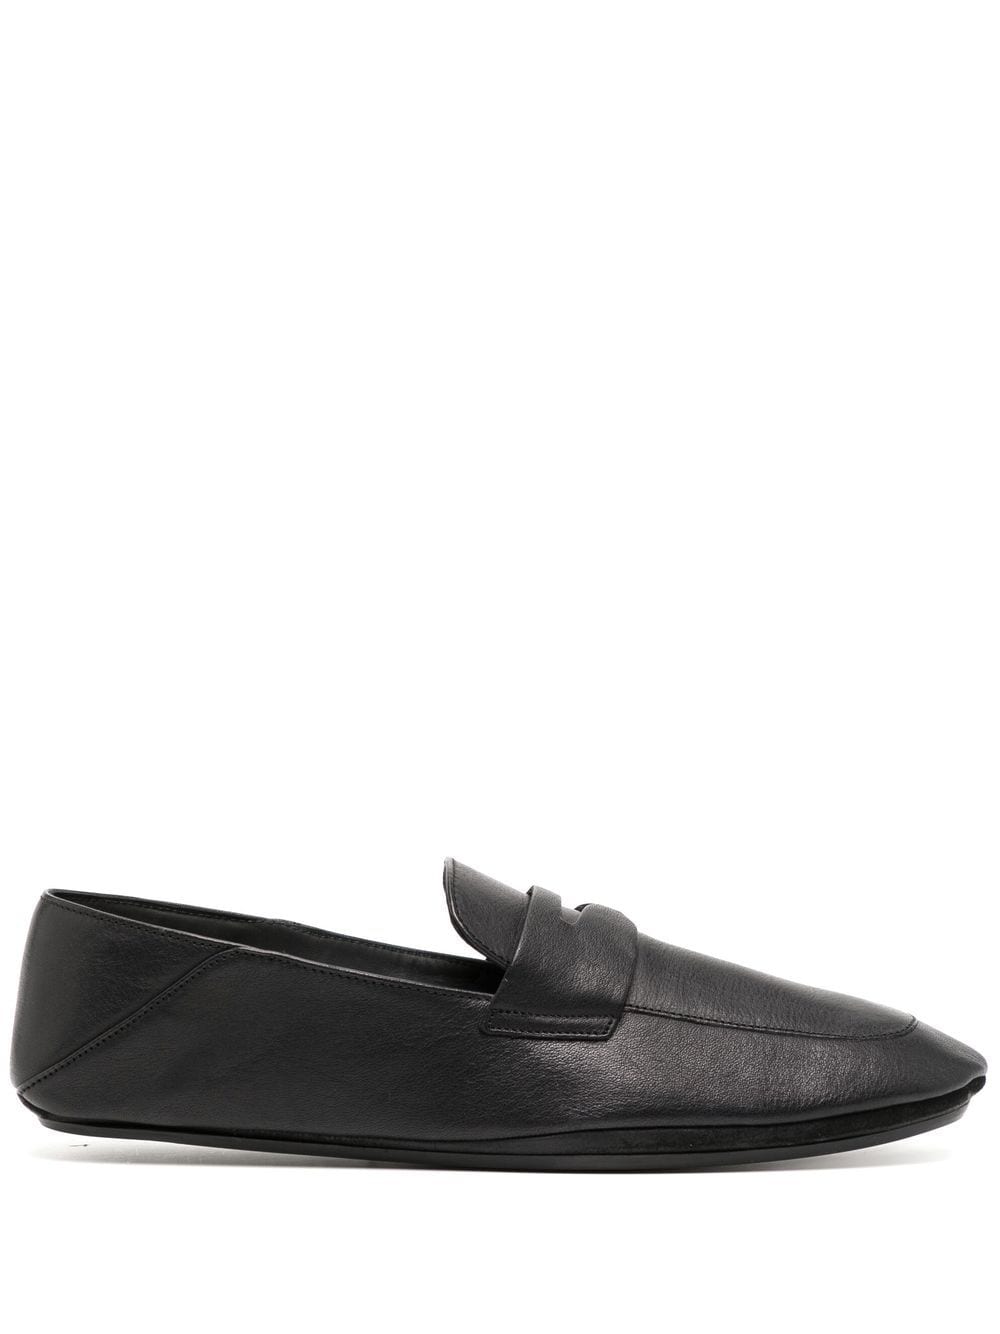 Paul Smith Step Down leather loafers - Black von Paul Smith